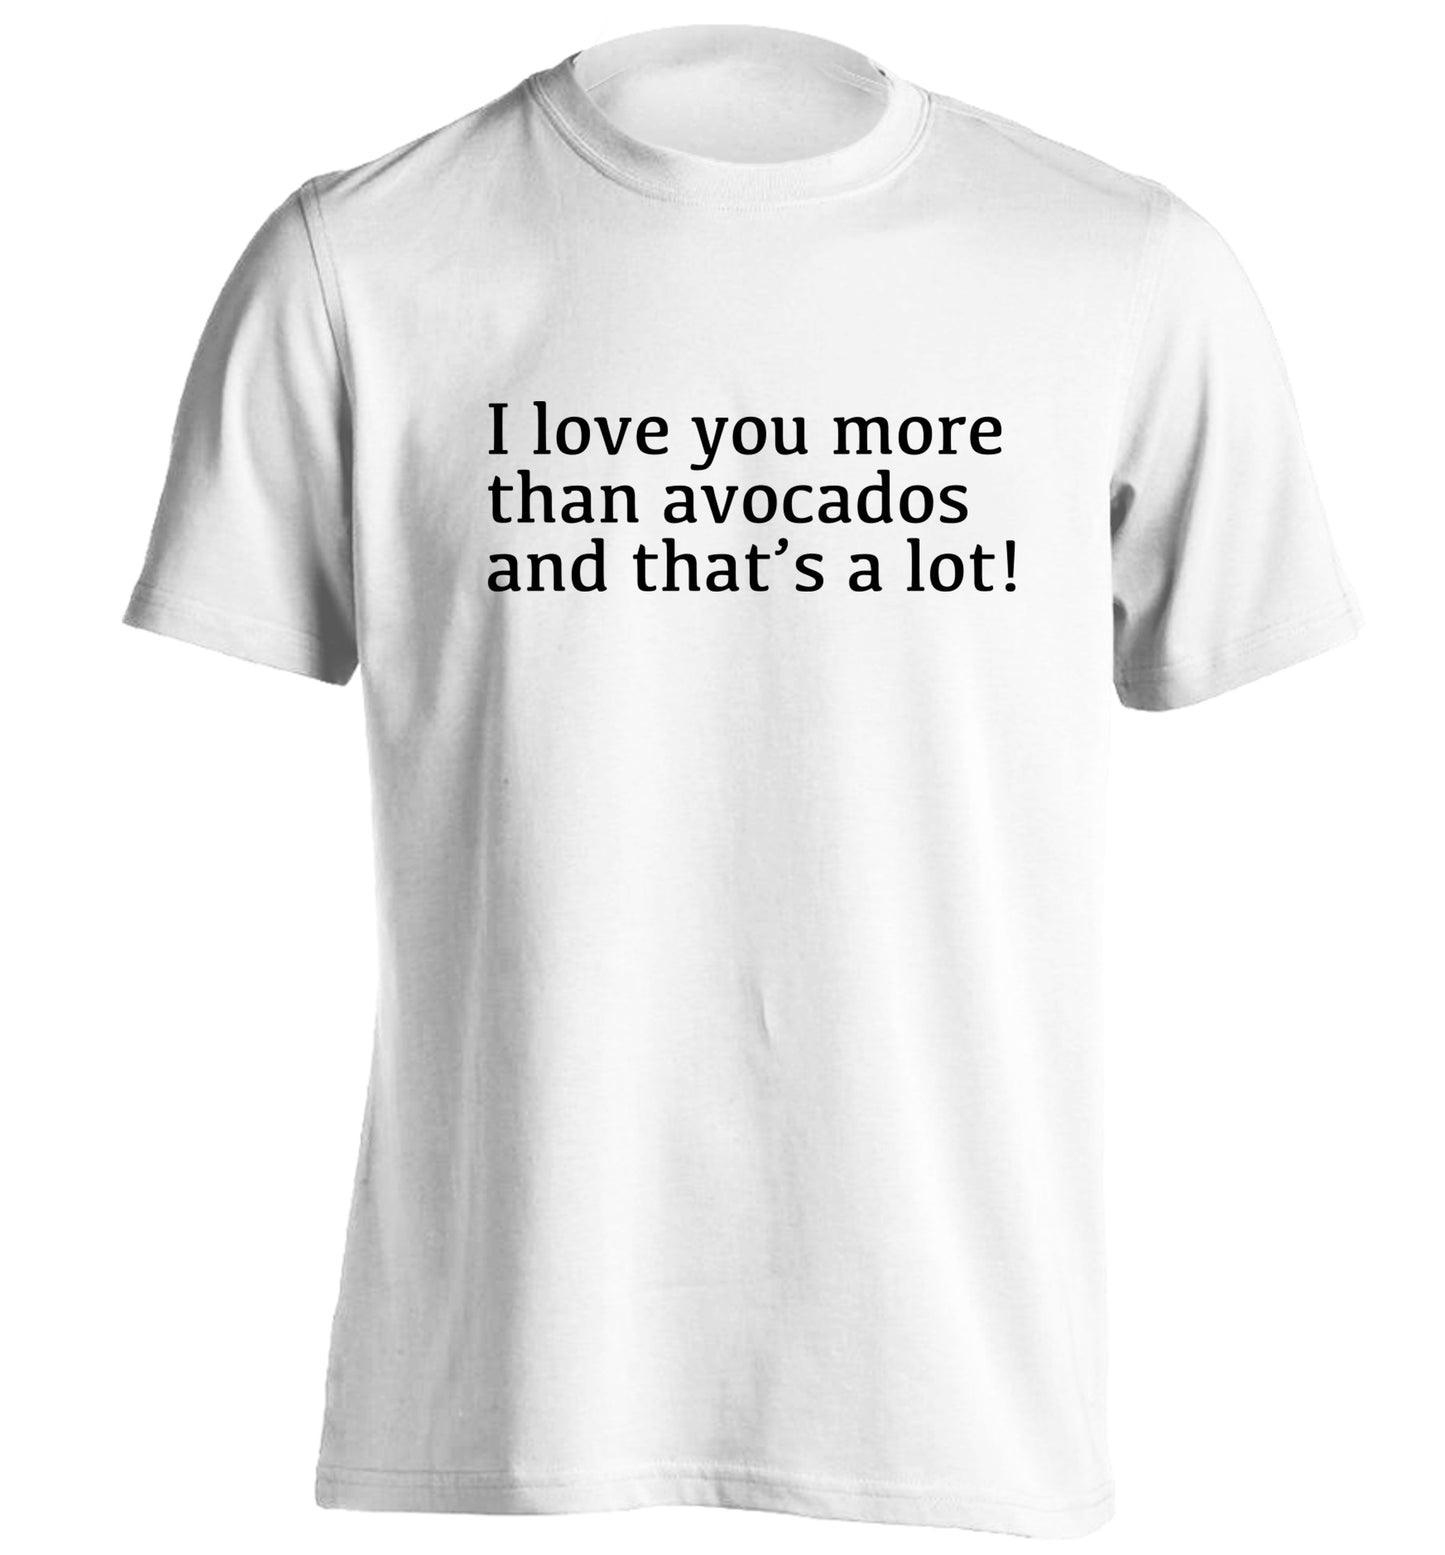 I love you more than avocados and that's a lot adults unisex white Tshirt 2XL